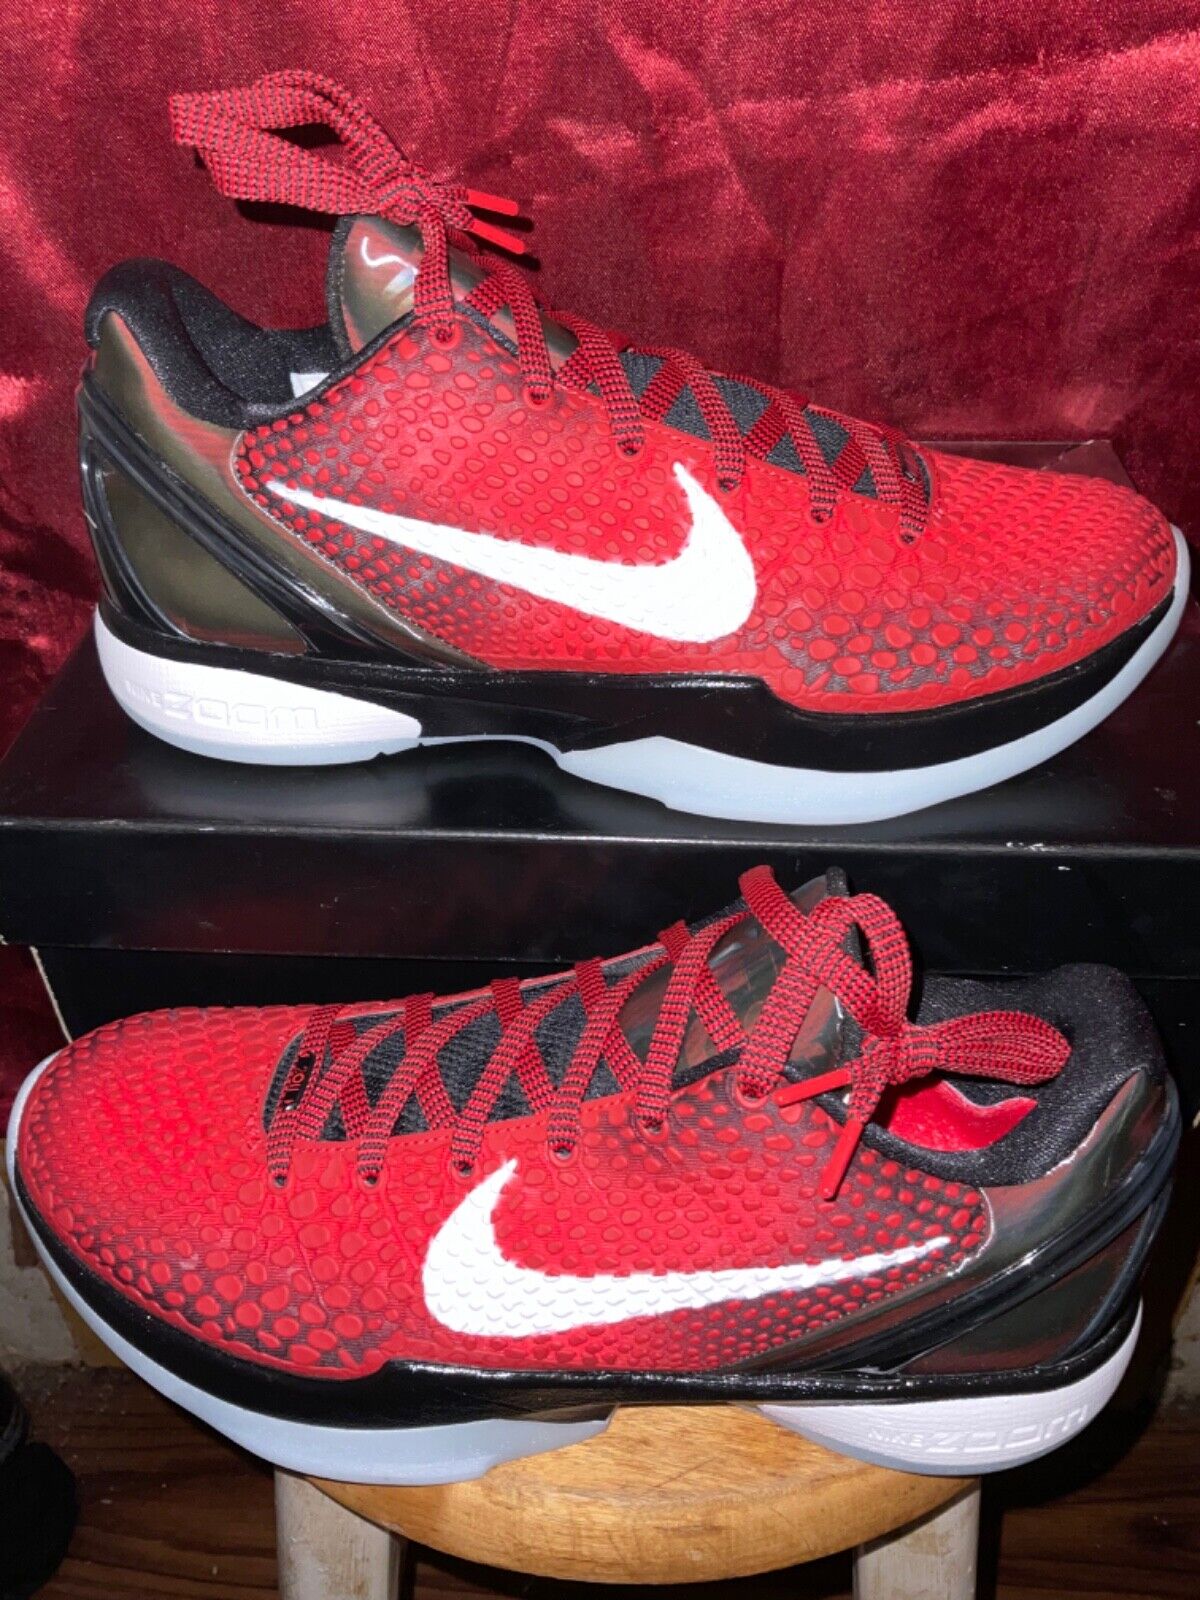 Nike Kobe 6 Protro All Star Challenge Red DH9888-600 US Size 9.5